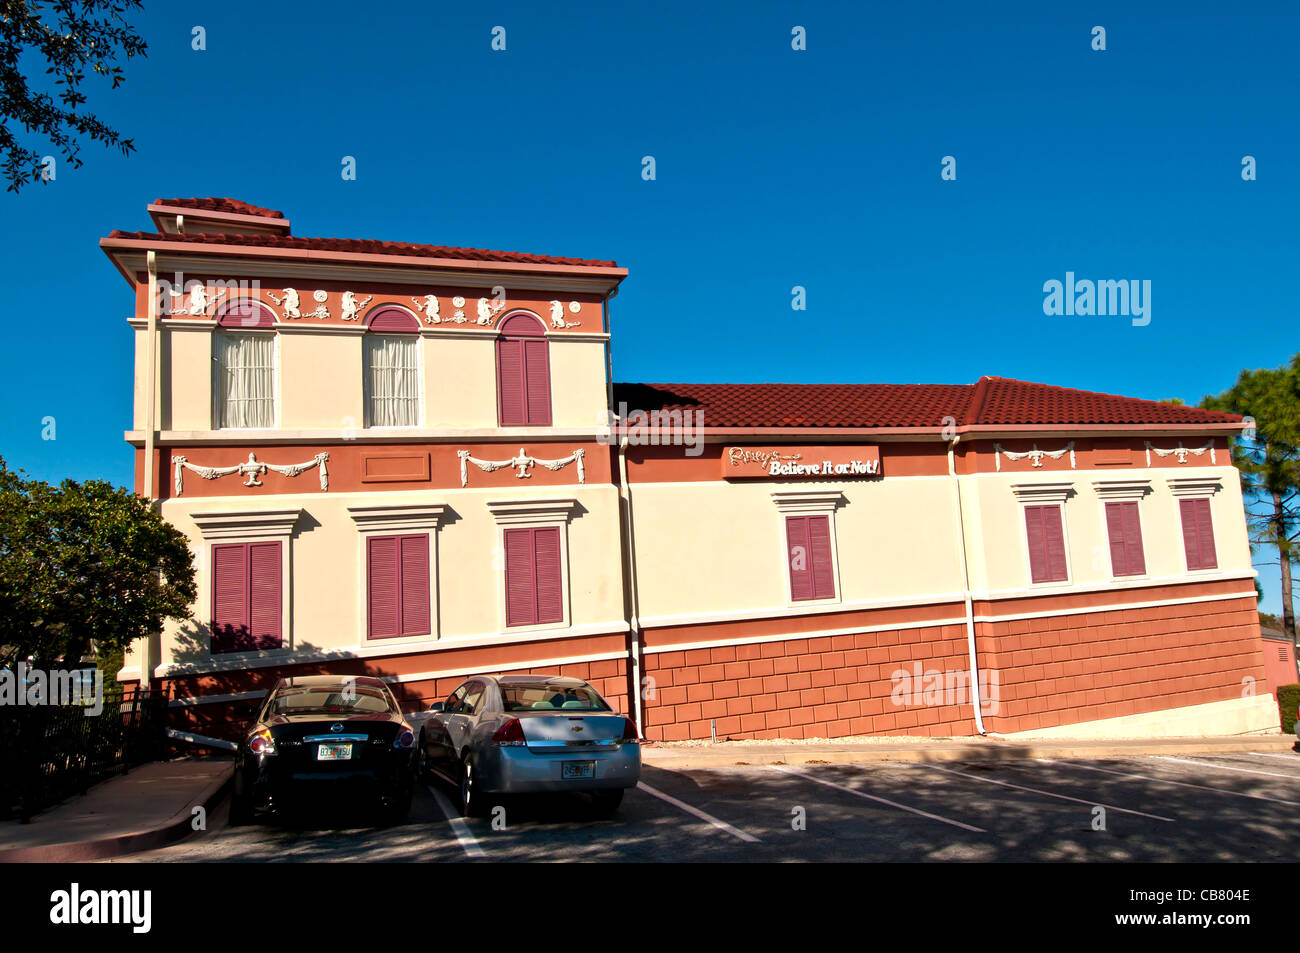 Ripley's Believe It Or Not attraction tilting building and cars on International Drive, Orlando Florida Stock Photo